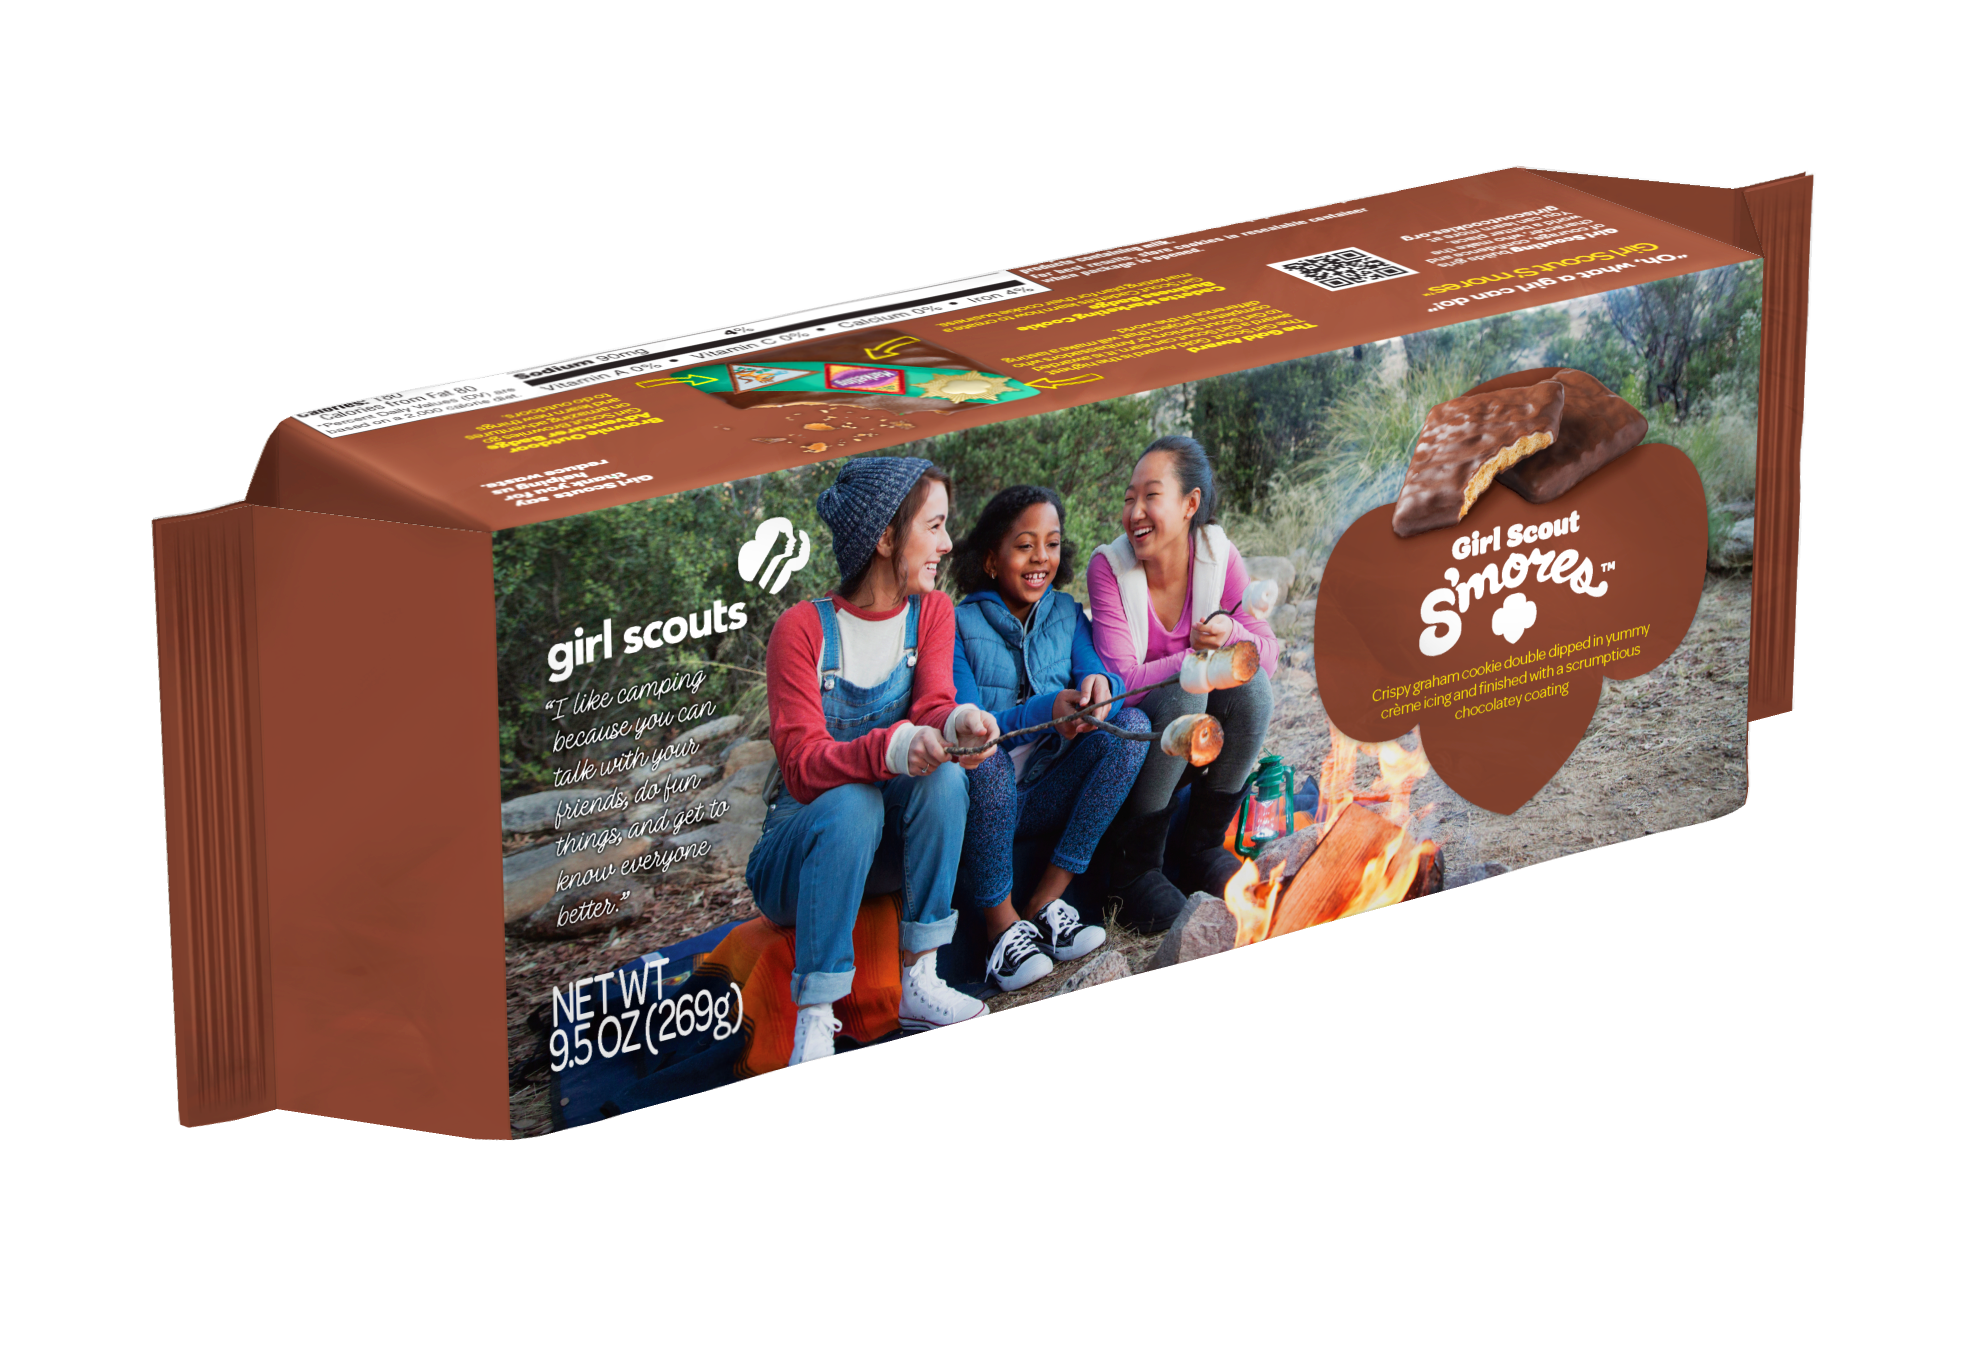 Girl Scout S’mores™ Cookies Are Back! All Things Girl Scouts